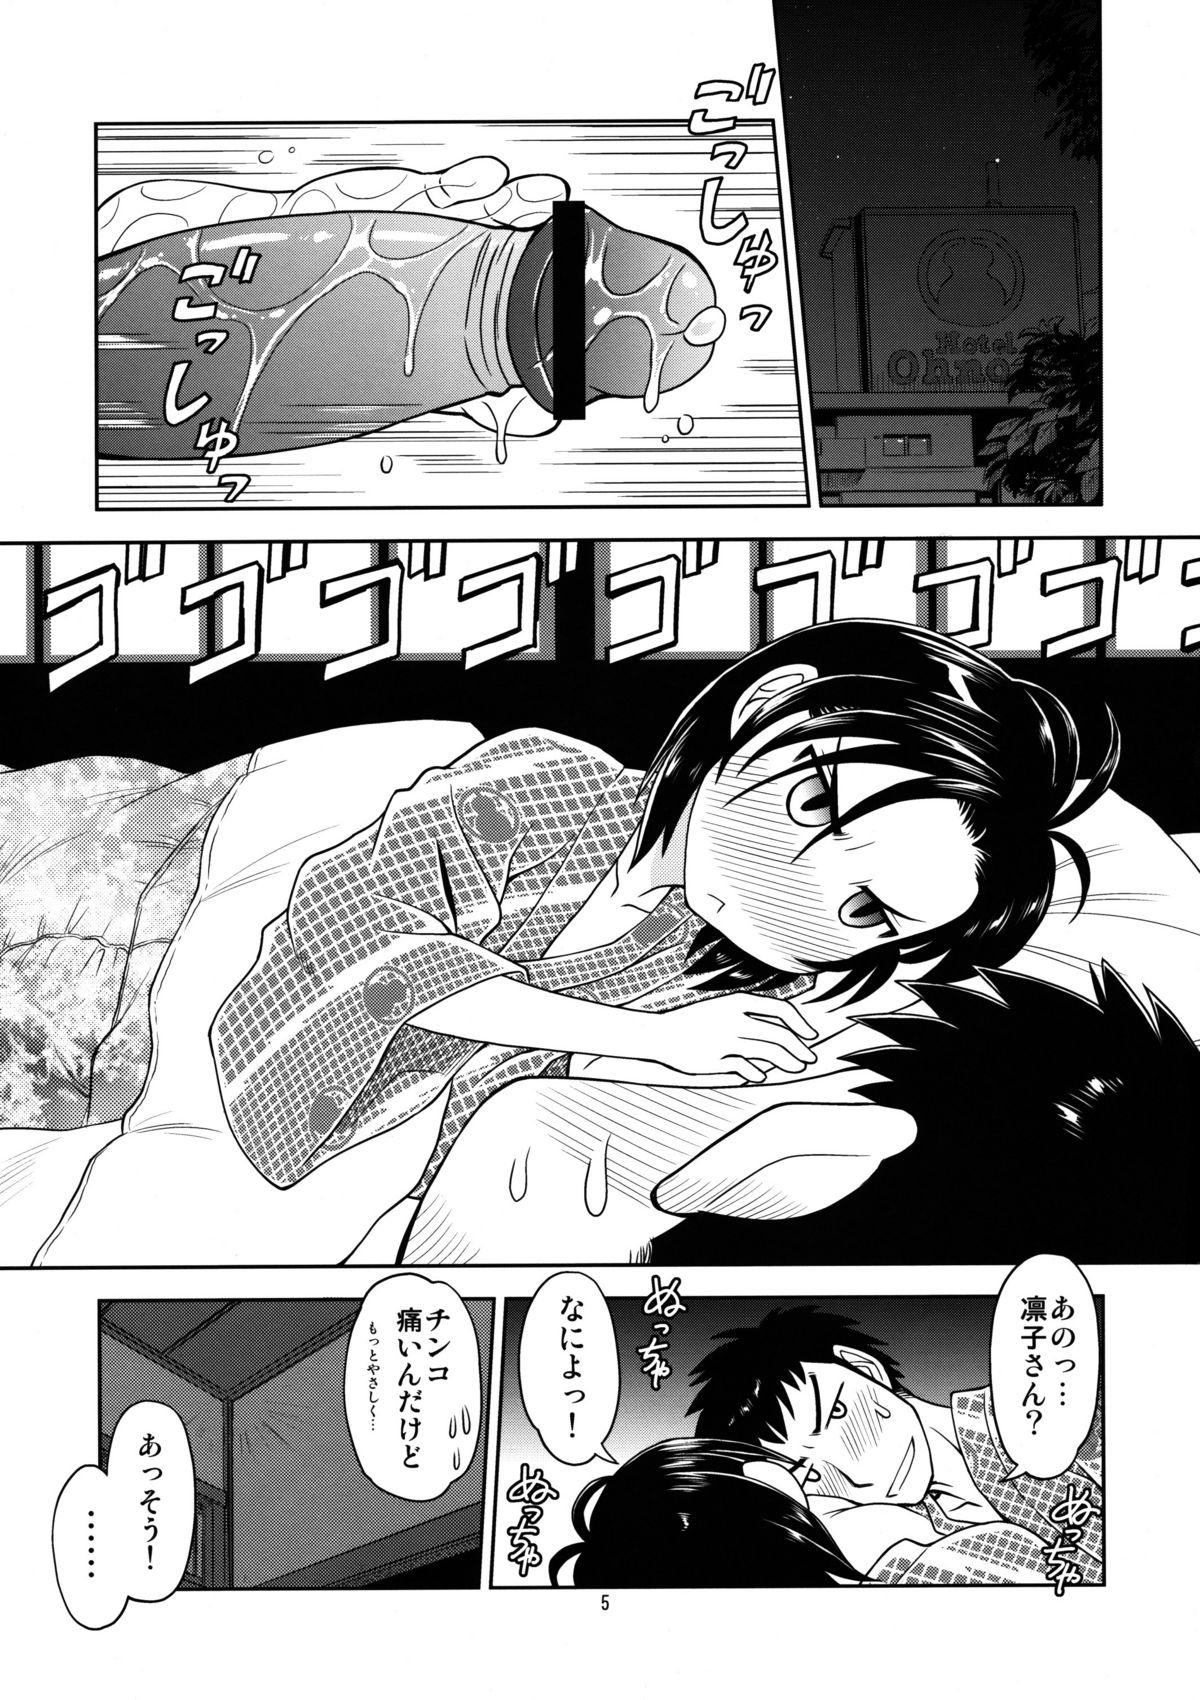 Peeing Flat Lover - Love plus Caiu Na Net - Page 4